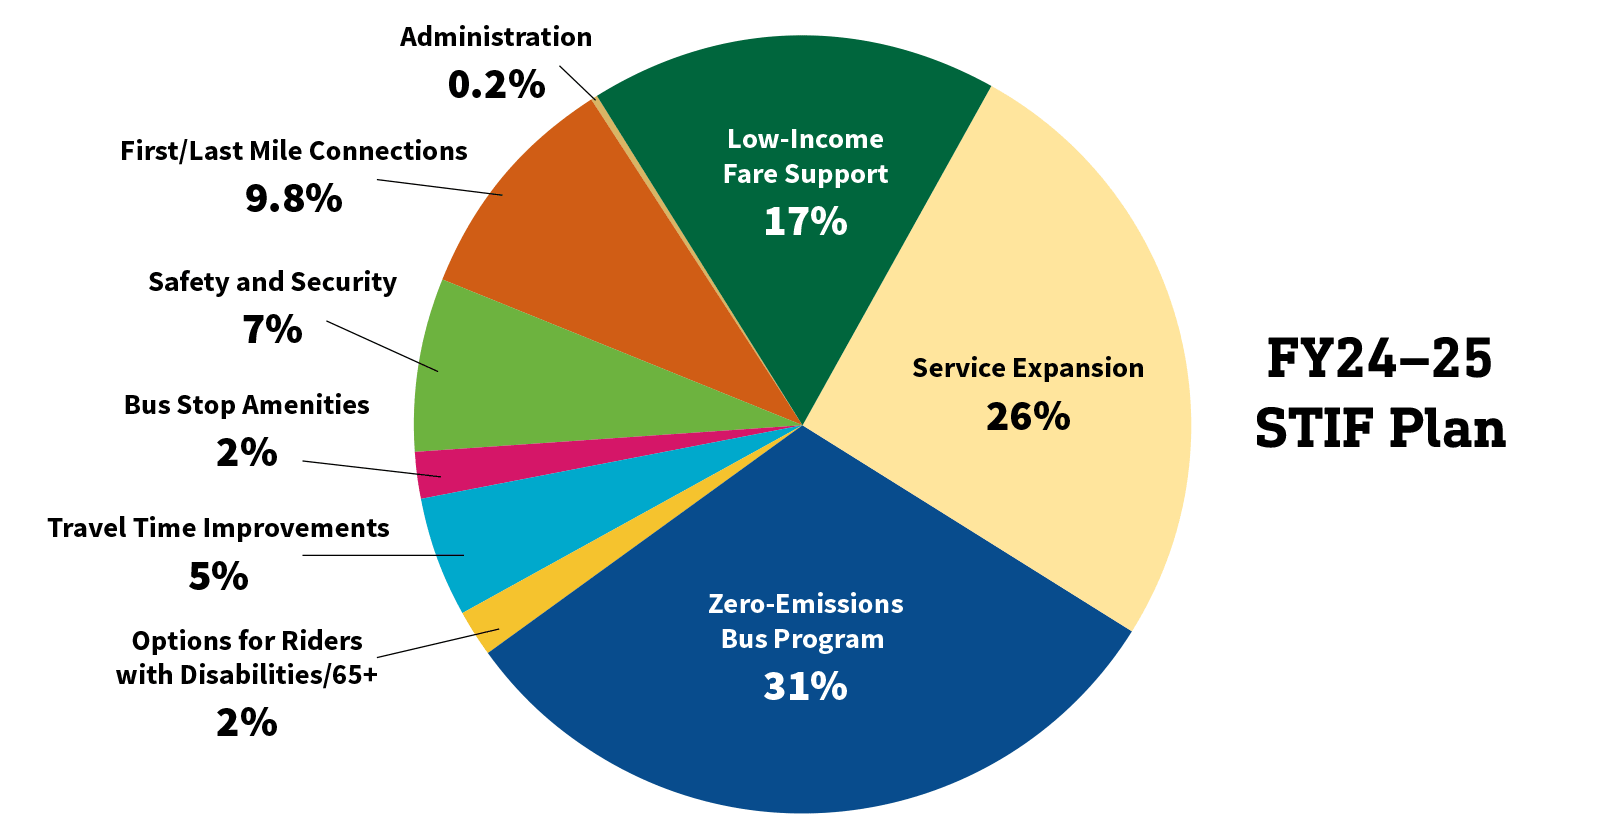 Pie chart showing the percentage breakdown of the The FY24–25 STIF Plan, described in detail below.